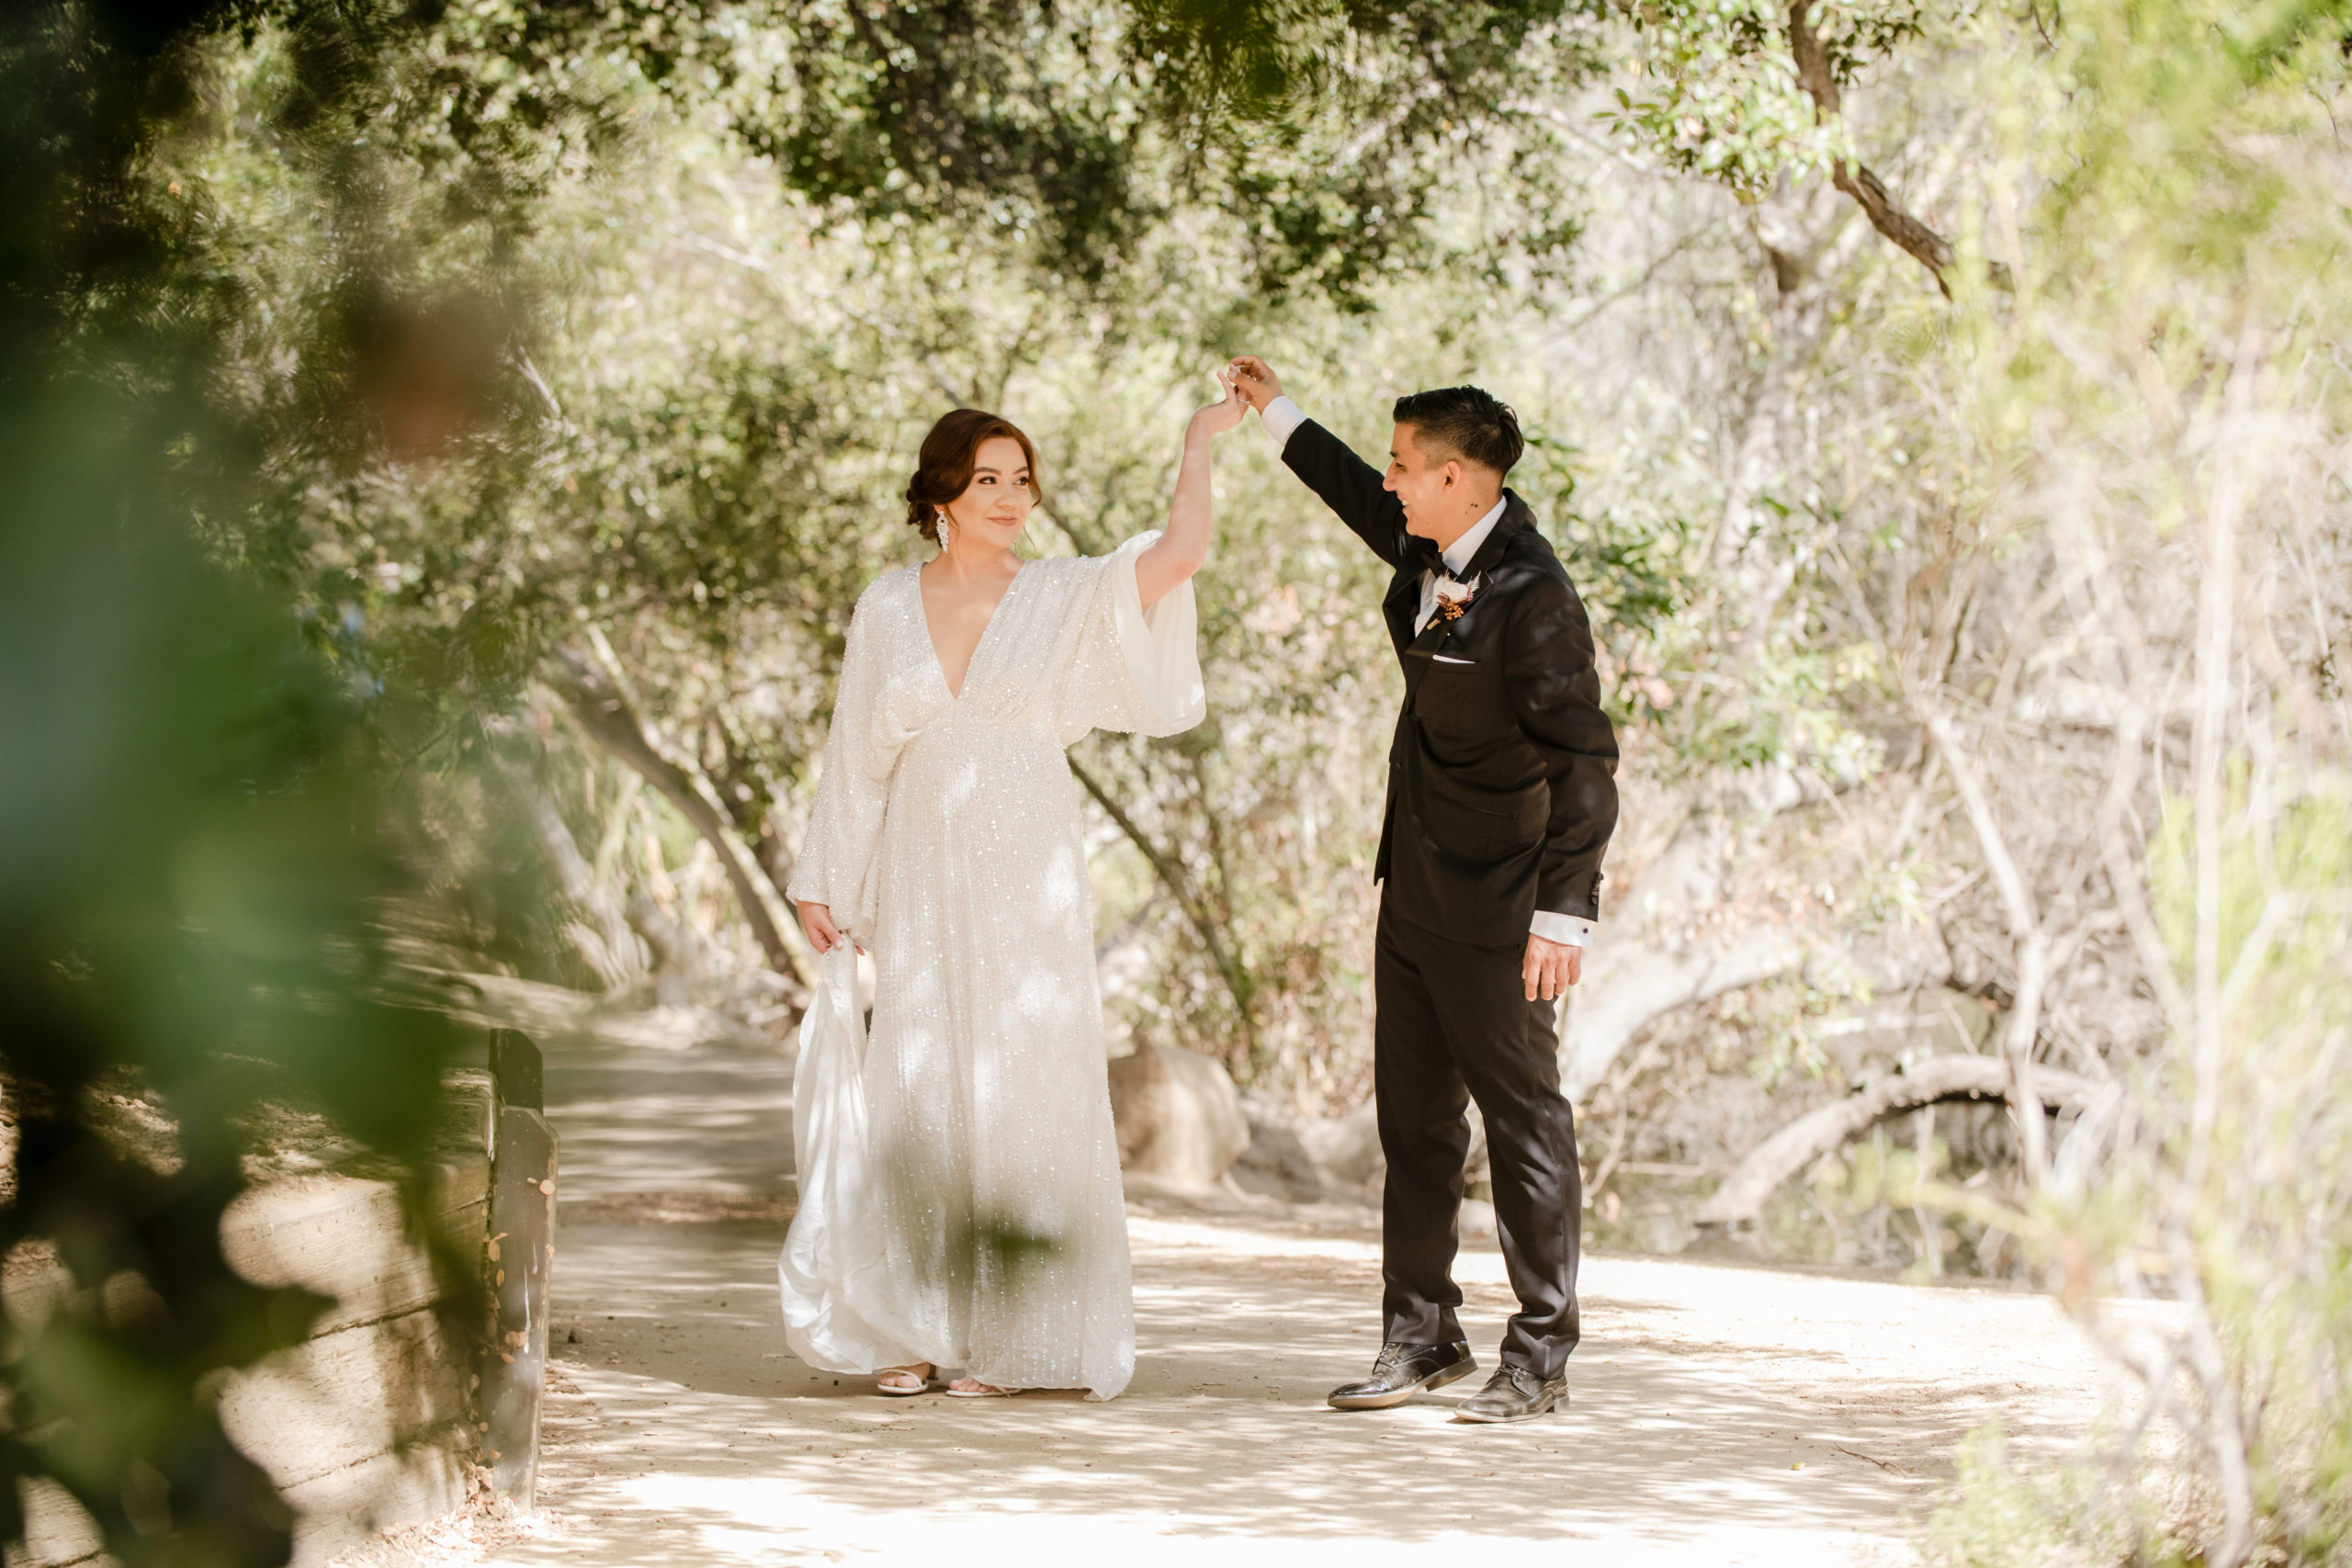 Postponed wedding turned intimate elopement at Franklin Canyon Park, Beverly Hills